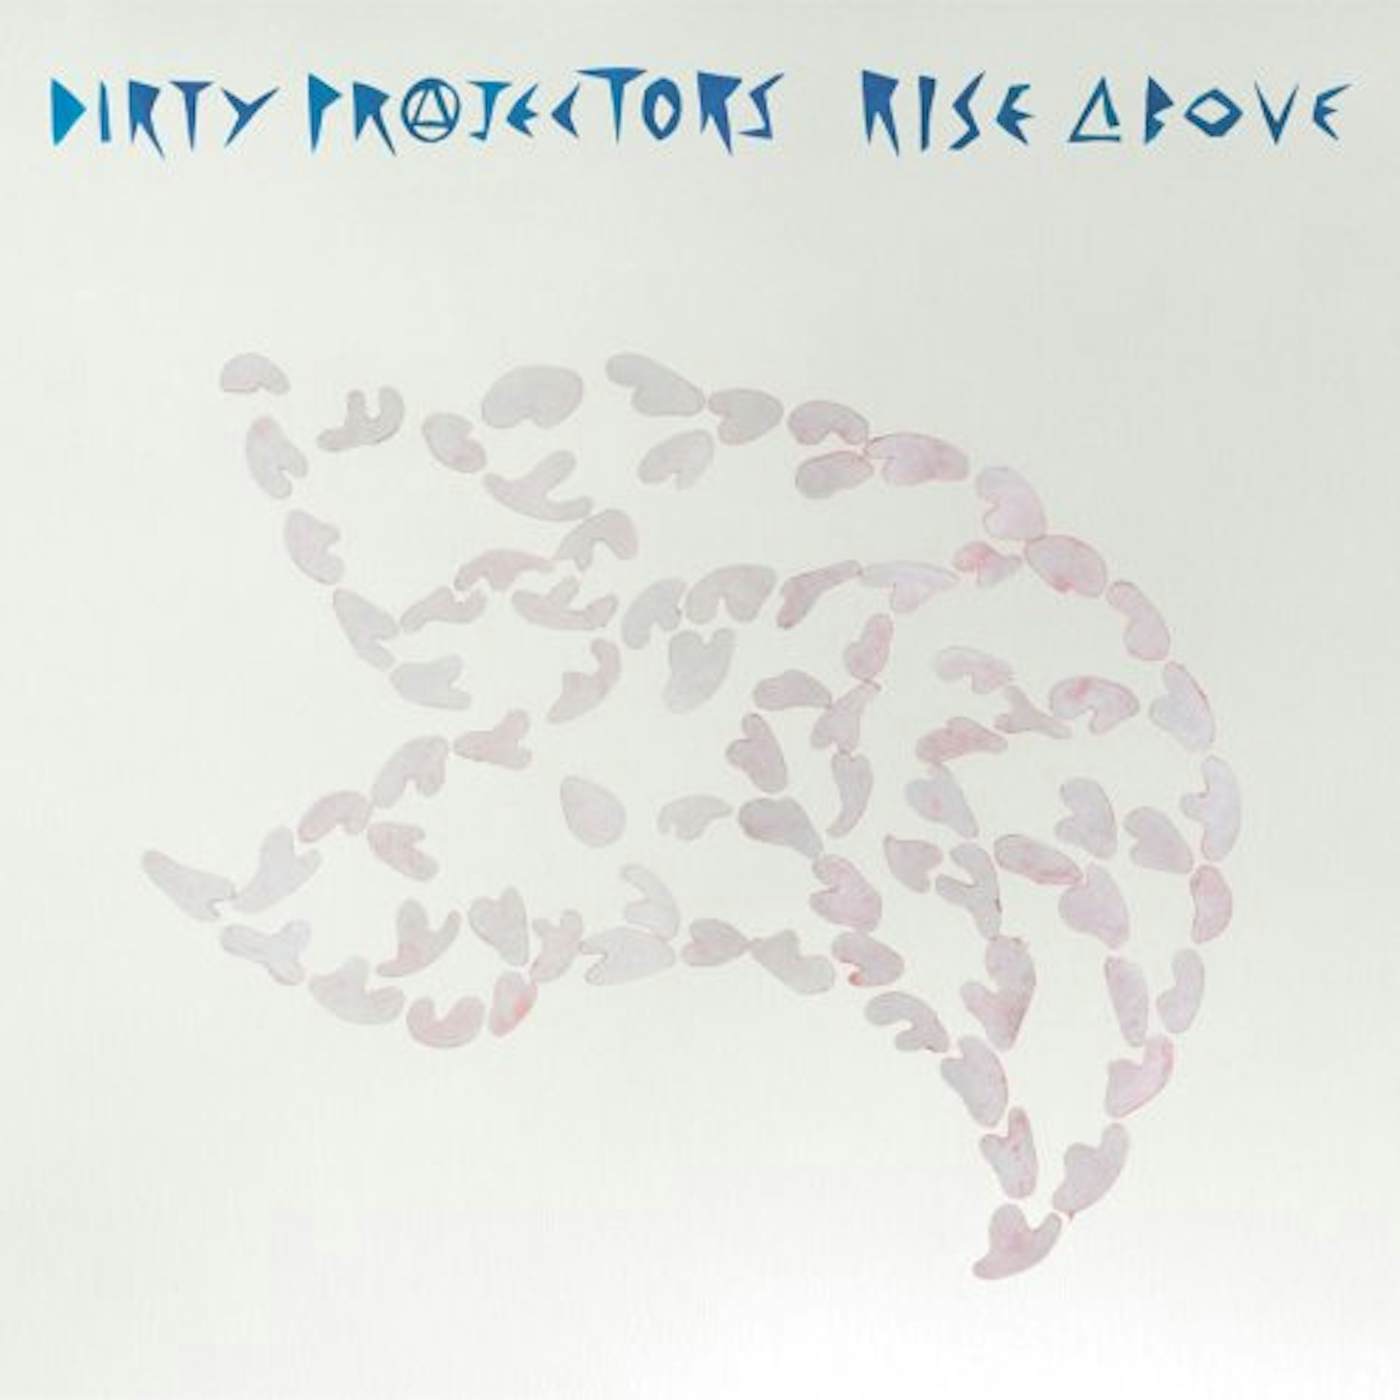 Dirty Projectors RISE ABOVE CD